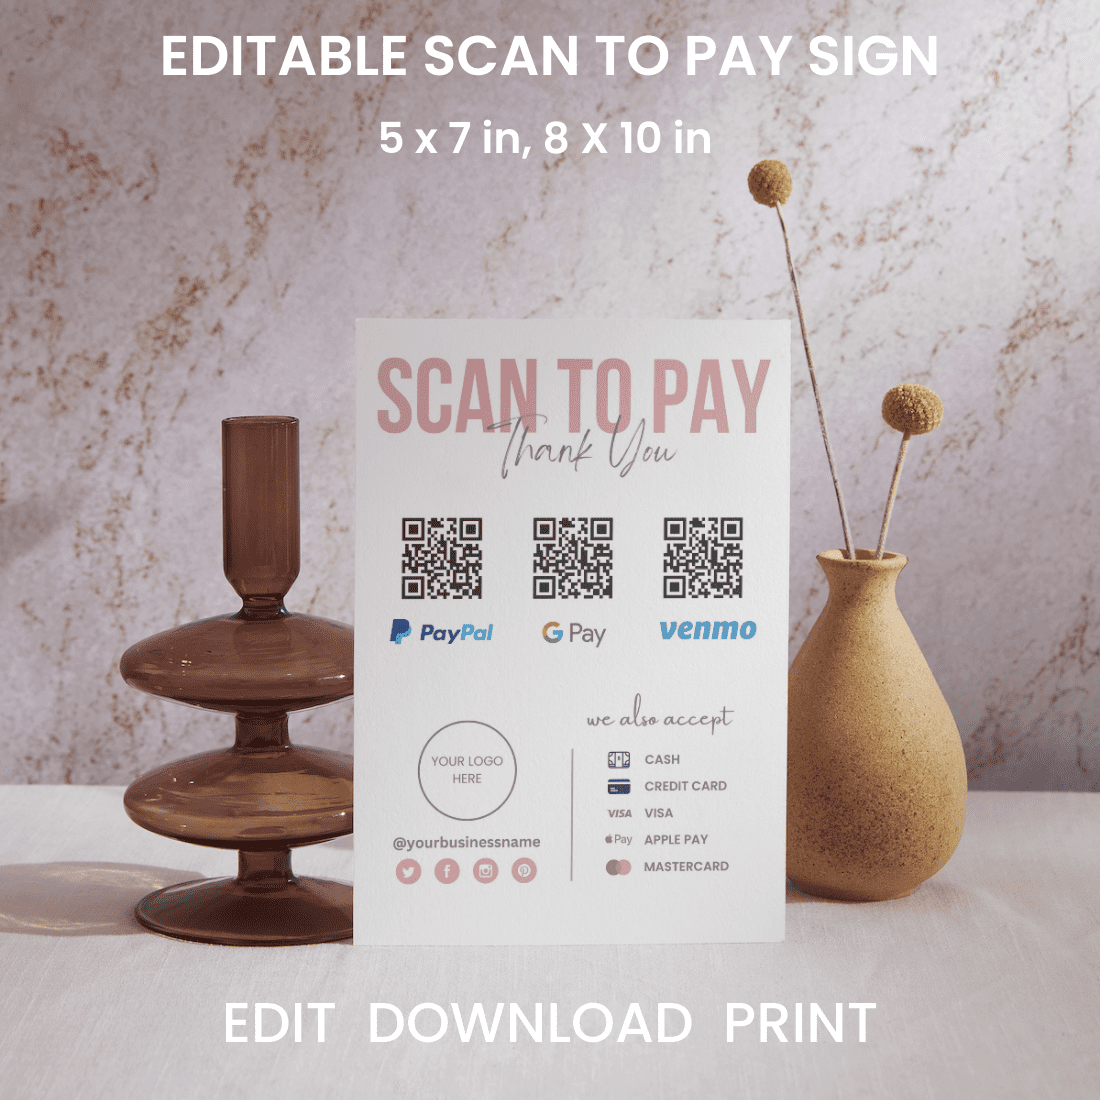 2 x Editable Scan to Pay Cards preview image.